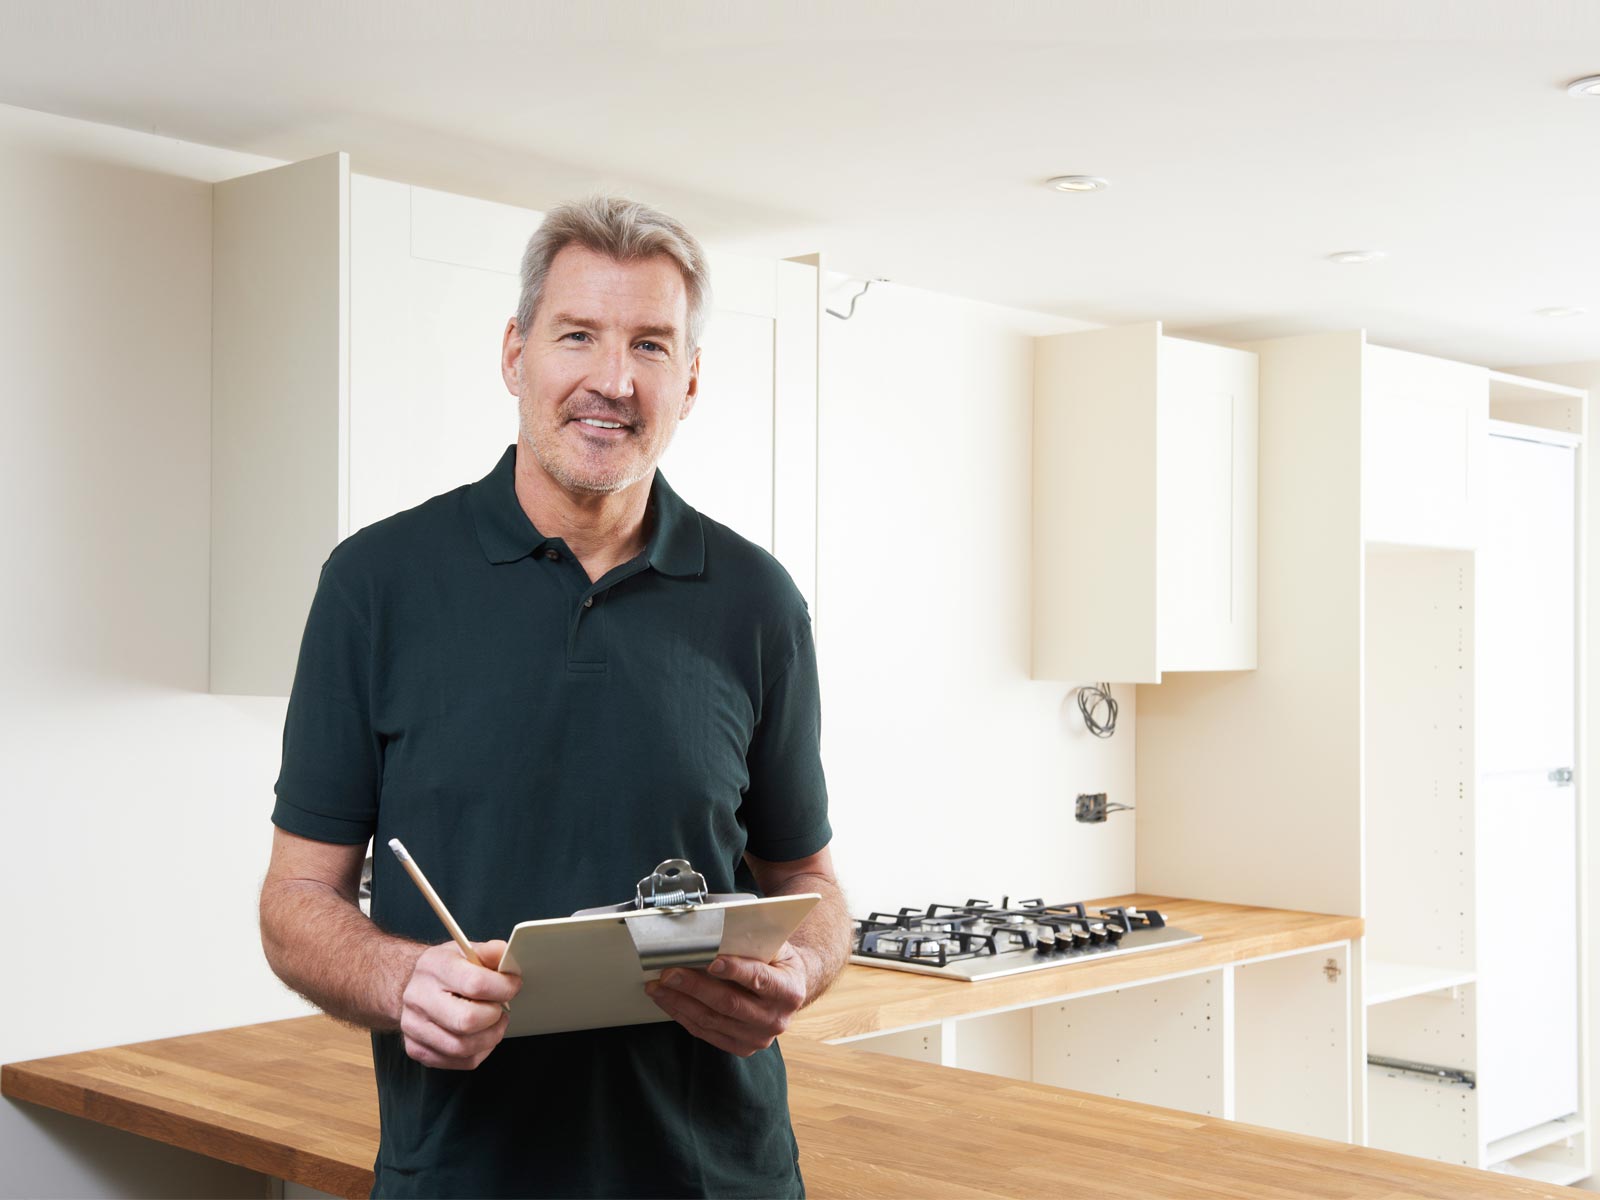 A private kitchen fitter standing in a fitted kitchen